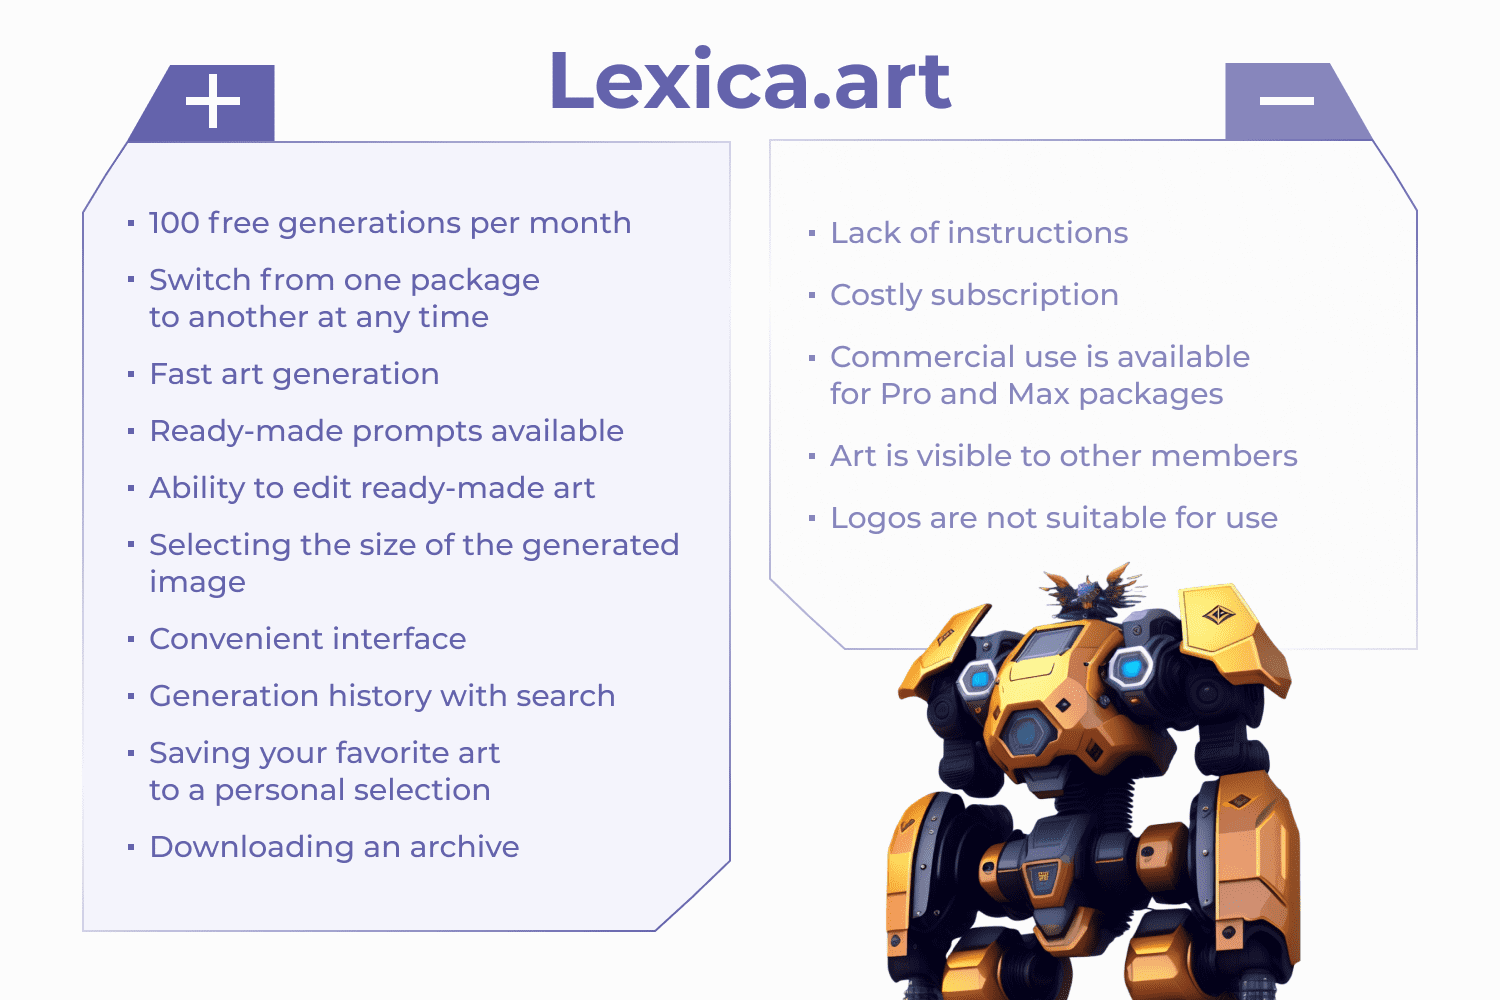 Table of advantages and disadvantages of a Lexica.art.